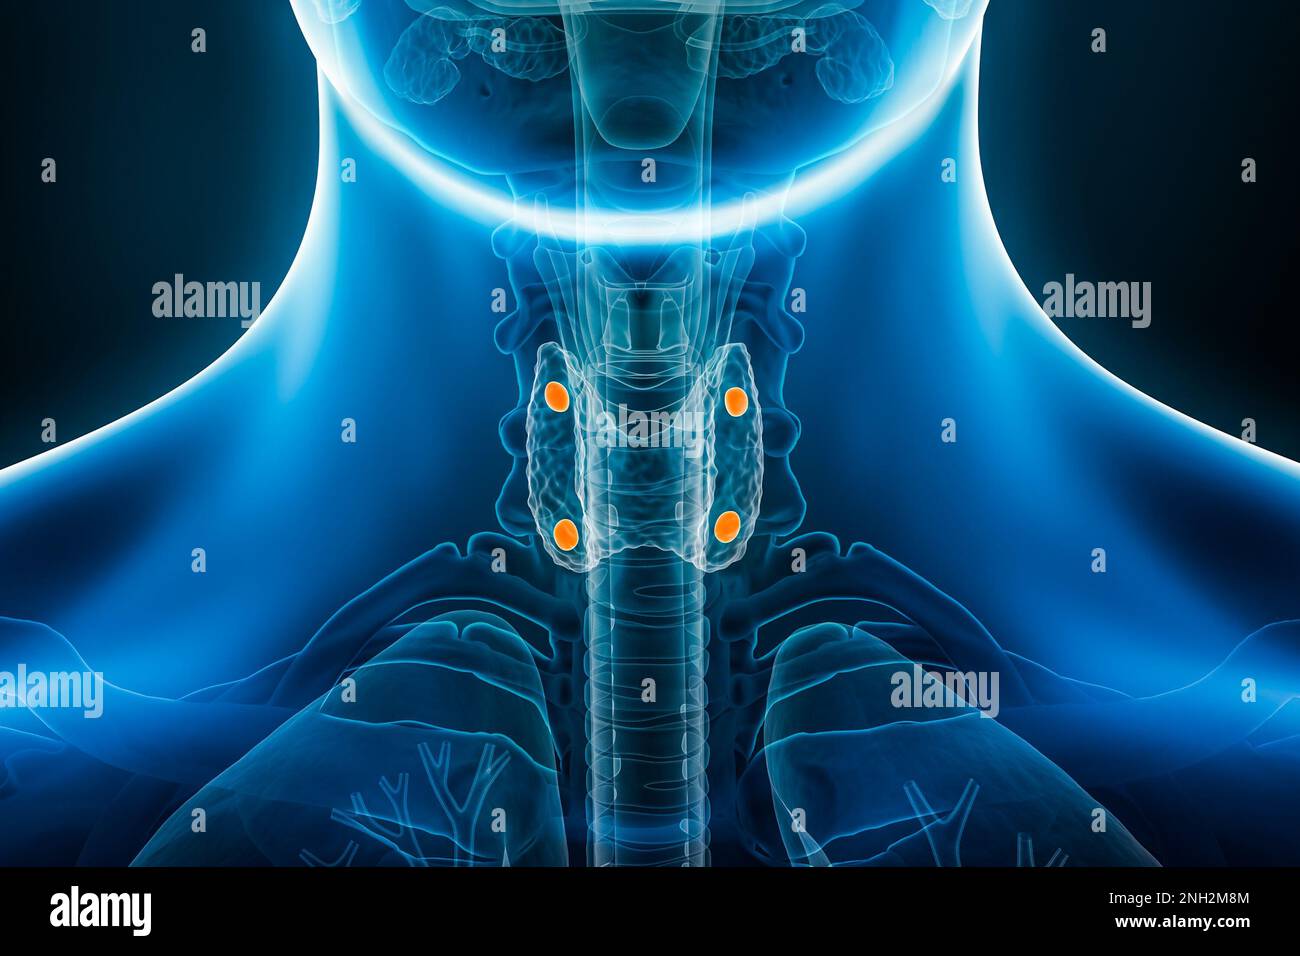 Xray anterior or front view of parathyroid and thyroid glands 3D rendering illustration with male body contours. Anatomy, endocrine system, medical, b Stock Photo